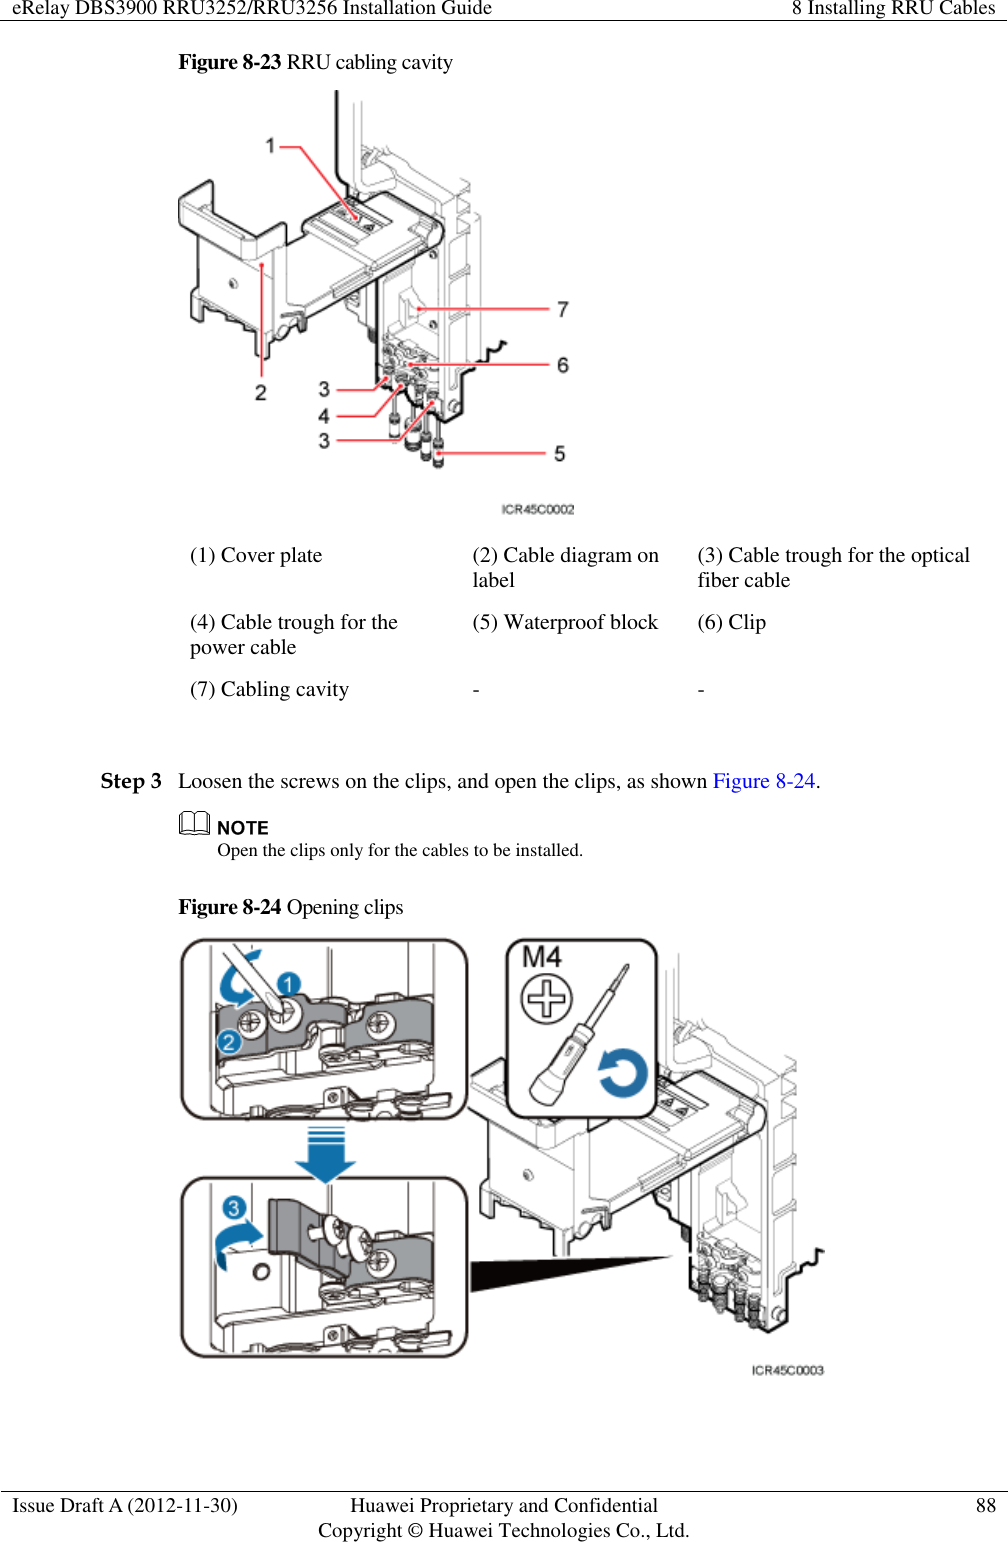 eRelay DBS3900 RRU3252/RRU3256 Installation Guide 8 Installing RRU Cables  Issue Draft A (2012-11-30) Huawei Proprietary and Confidential                                     Copyright © Huawei Technologies Co., Ltd. 88  Figure 8-23 RRU cabling cavity  (1) Cover plate (2) Cable diagram on label (3) Cable trough for the optical fiber cable   (4) Cable trough for the power cable (5) Waterproof block (6) Clip (7) Cabling cavity - -  Step 3 Loosen the screws on the clips, and open the clips, as shown Figure 8-24.  Open the clips only for the cables to be installed. Figure 8-24 Opening clips   